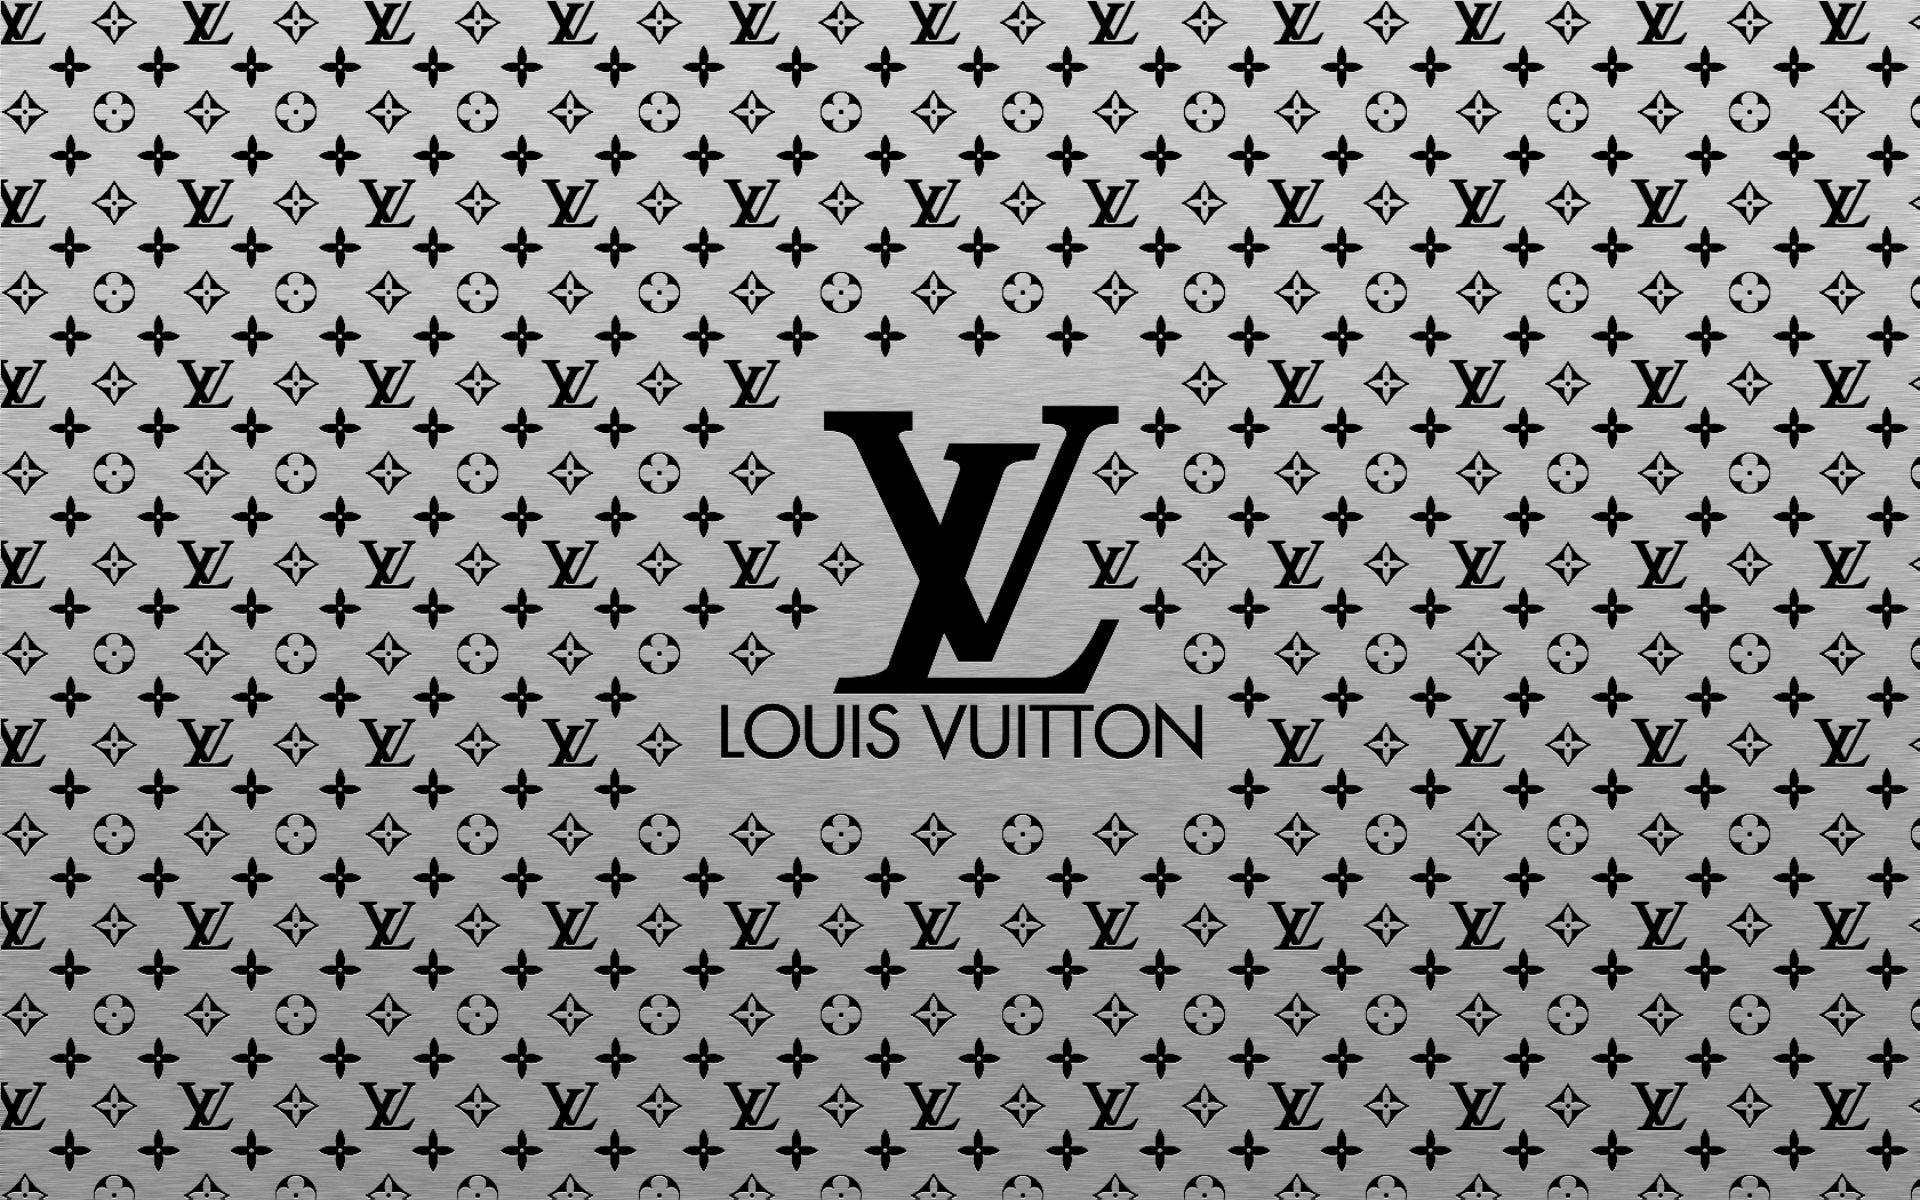 Aesthetic Louis Vuitton Wallpapers - KoLPaPer - Awesome Free HD Wallpapers